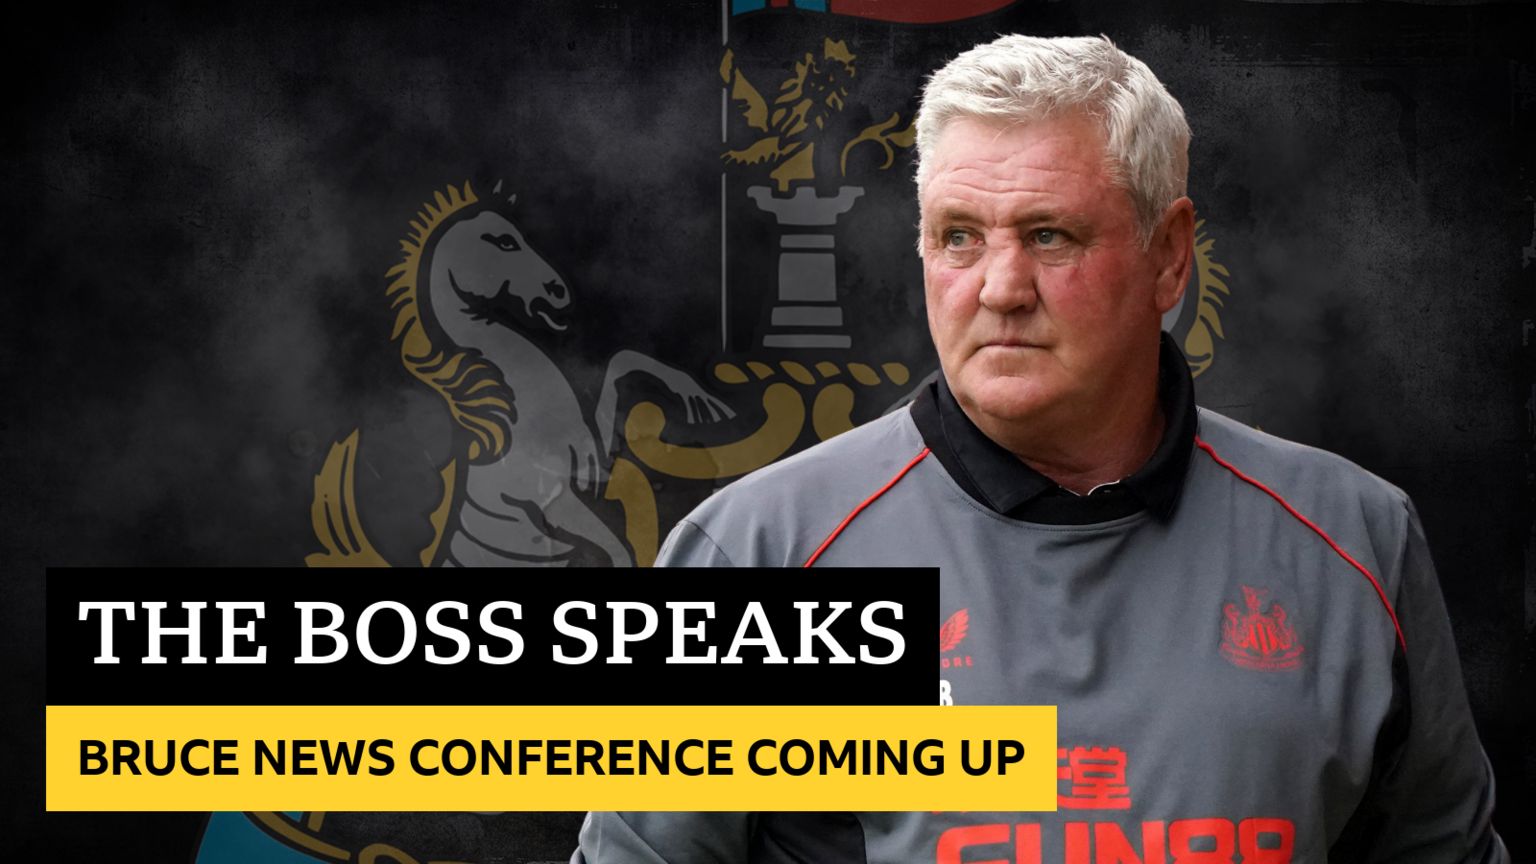 Steve Bruce news conference coming up